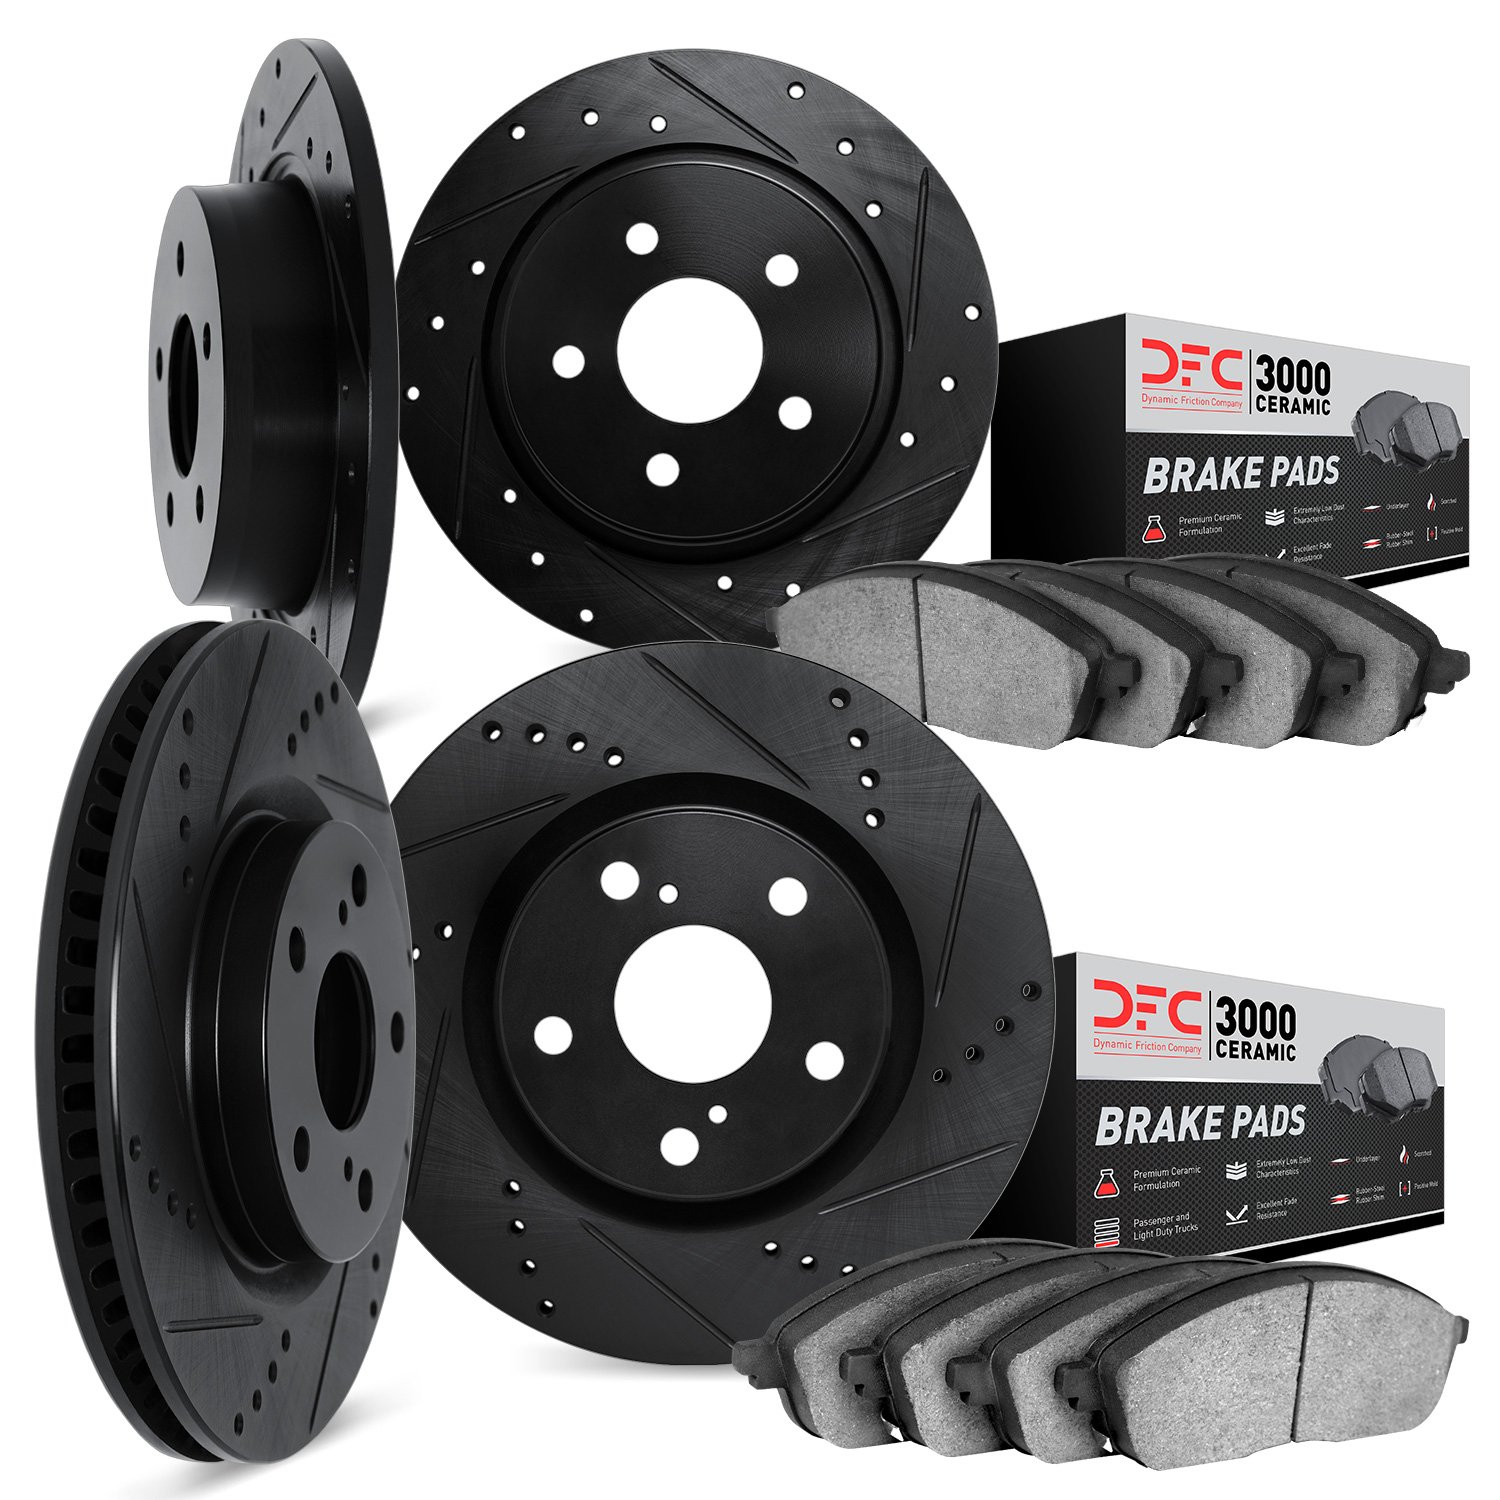 8304-13044 Drilled/Slotted Brake Rotors with 3000-Series Ceramic Brake Pads Kit [Black], 2012-2016 Subaru, Position: Front and R